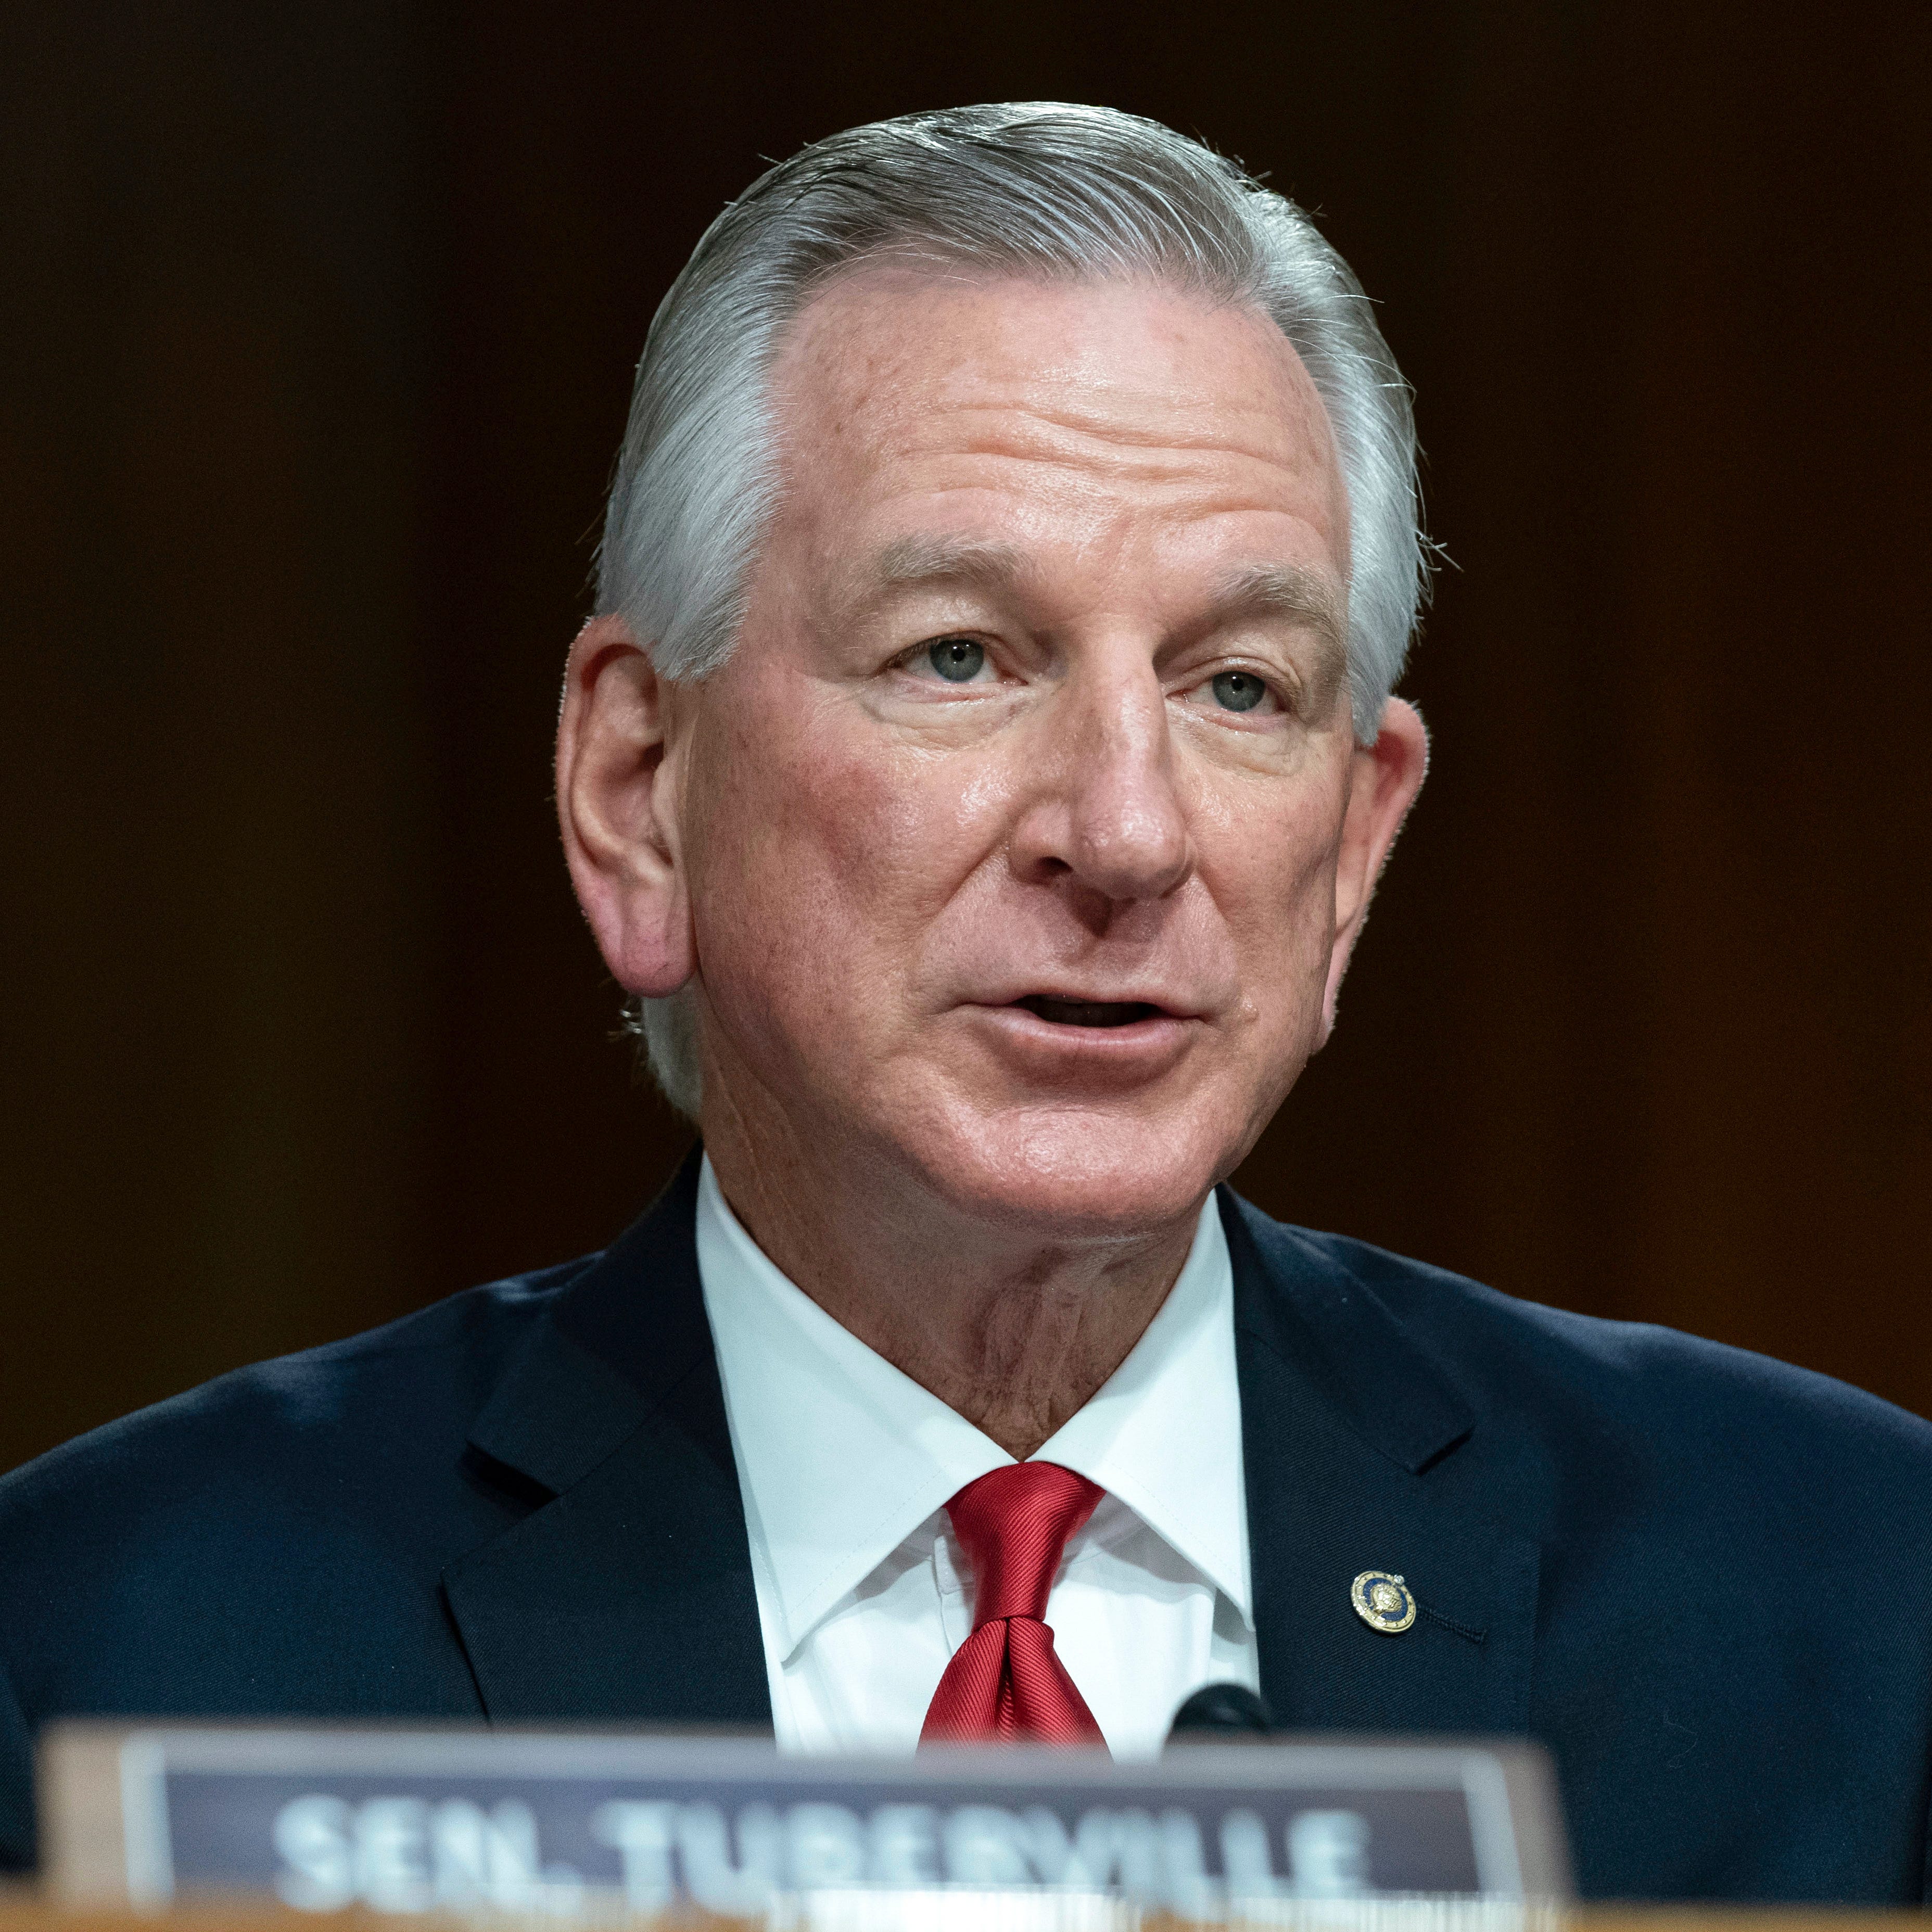 Sen. Tommy Tuberville, R-Ala., speaks during the Senate Agriculture, Nutrition, and Forestry Subcommittee on Commodities, Risk Management, and Trade on Commodity Programs, Credit and Crop Insurance hearing at Capitol Hill in Washington, Tuesday, May 2, 2023,